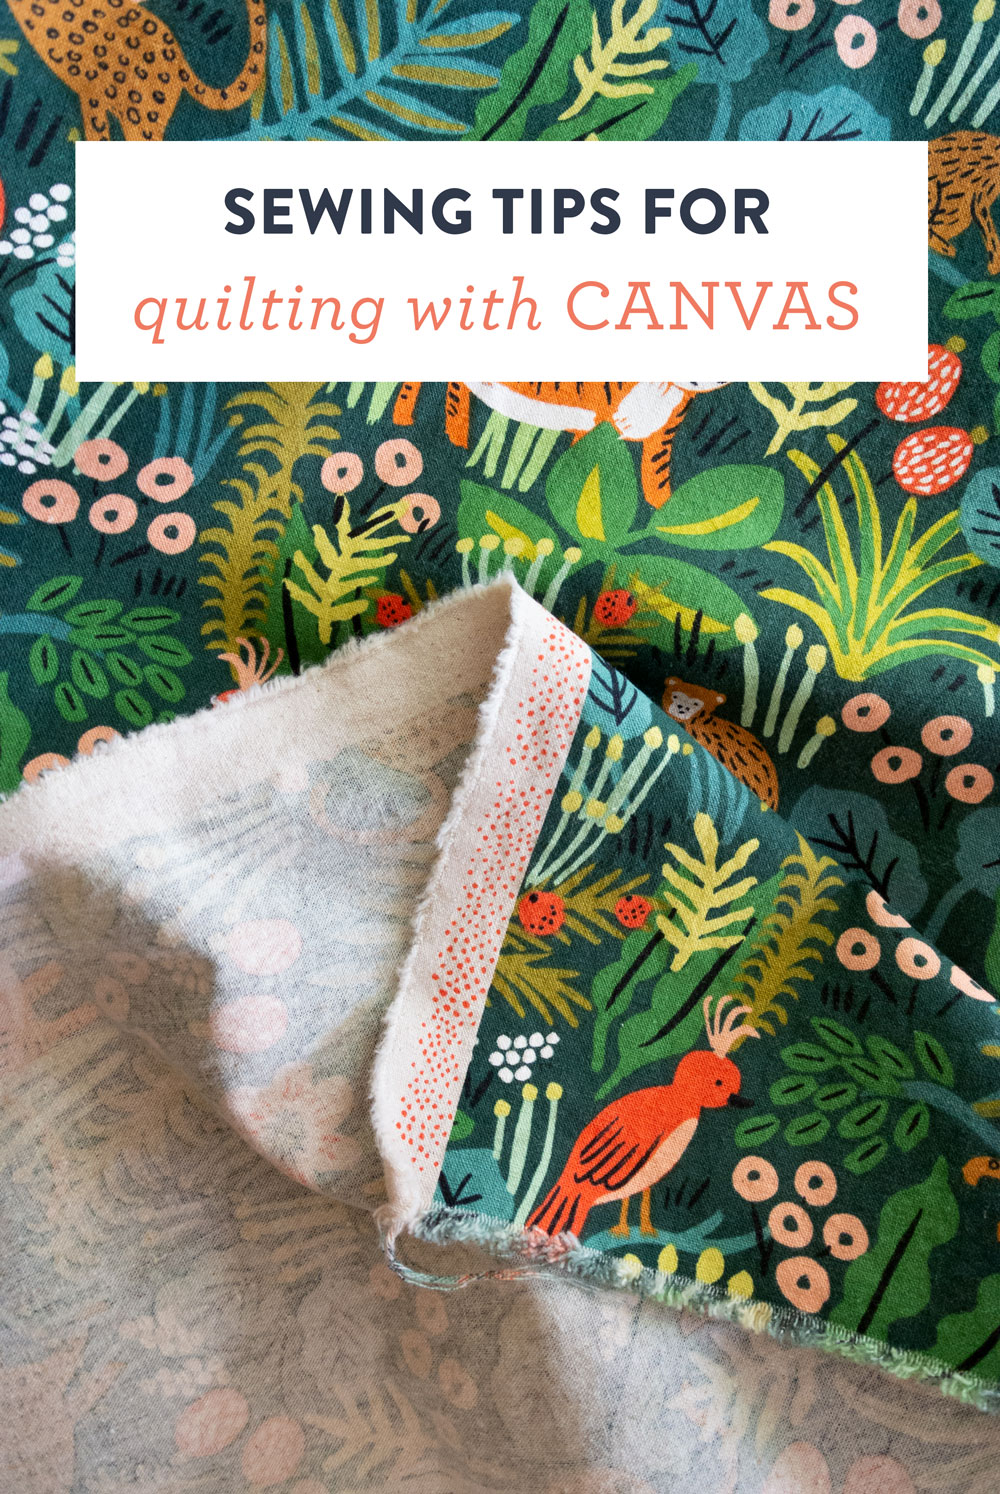 Sew with canvas in confidence! Learn the tricks, tools, and tips for using canvas in your next quilt project.